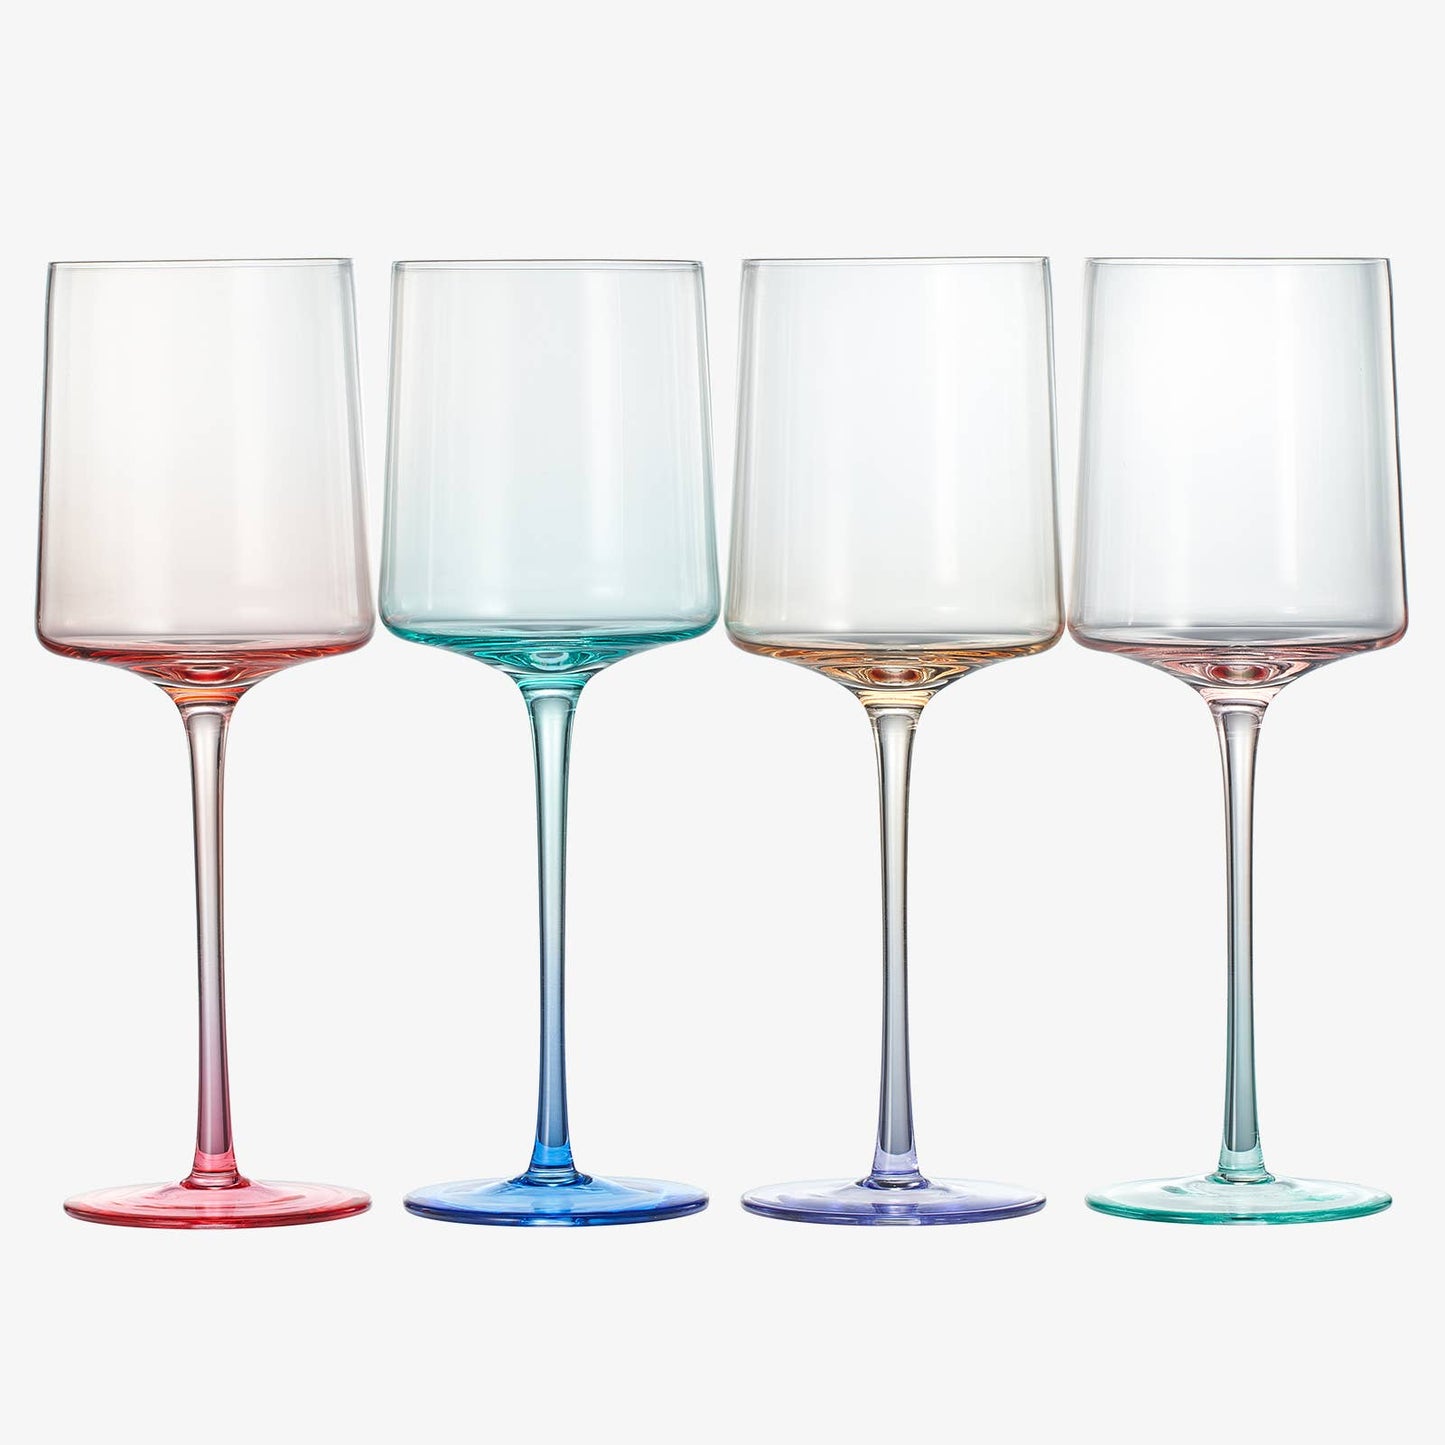 Handblown Set of 4 Colored Two-Toned Crystal Wine Glassware